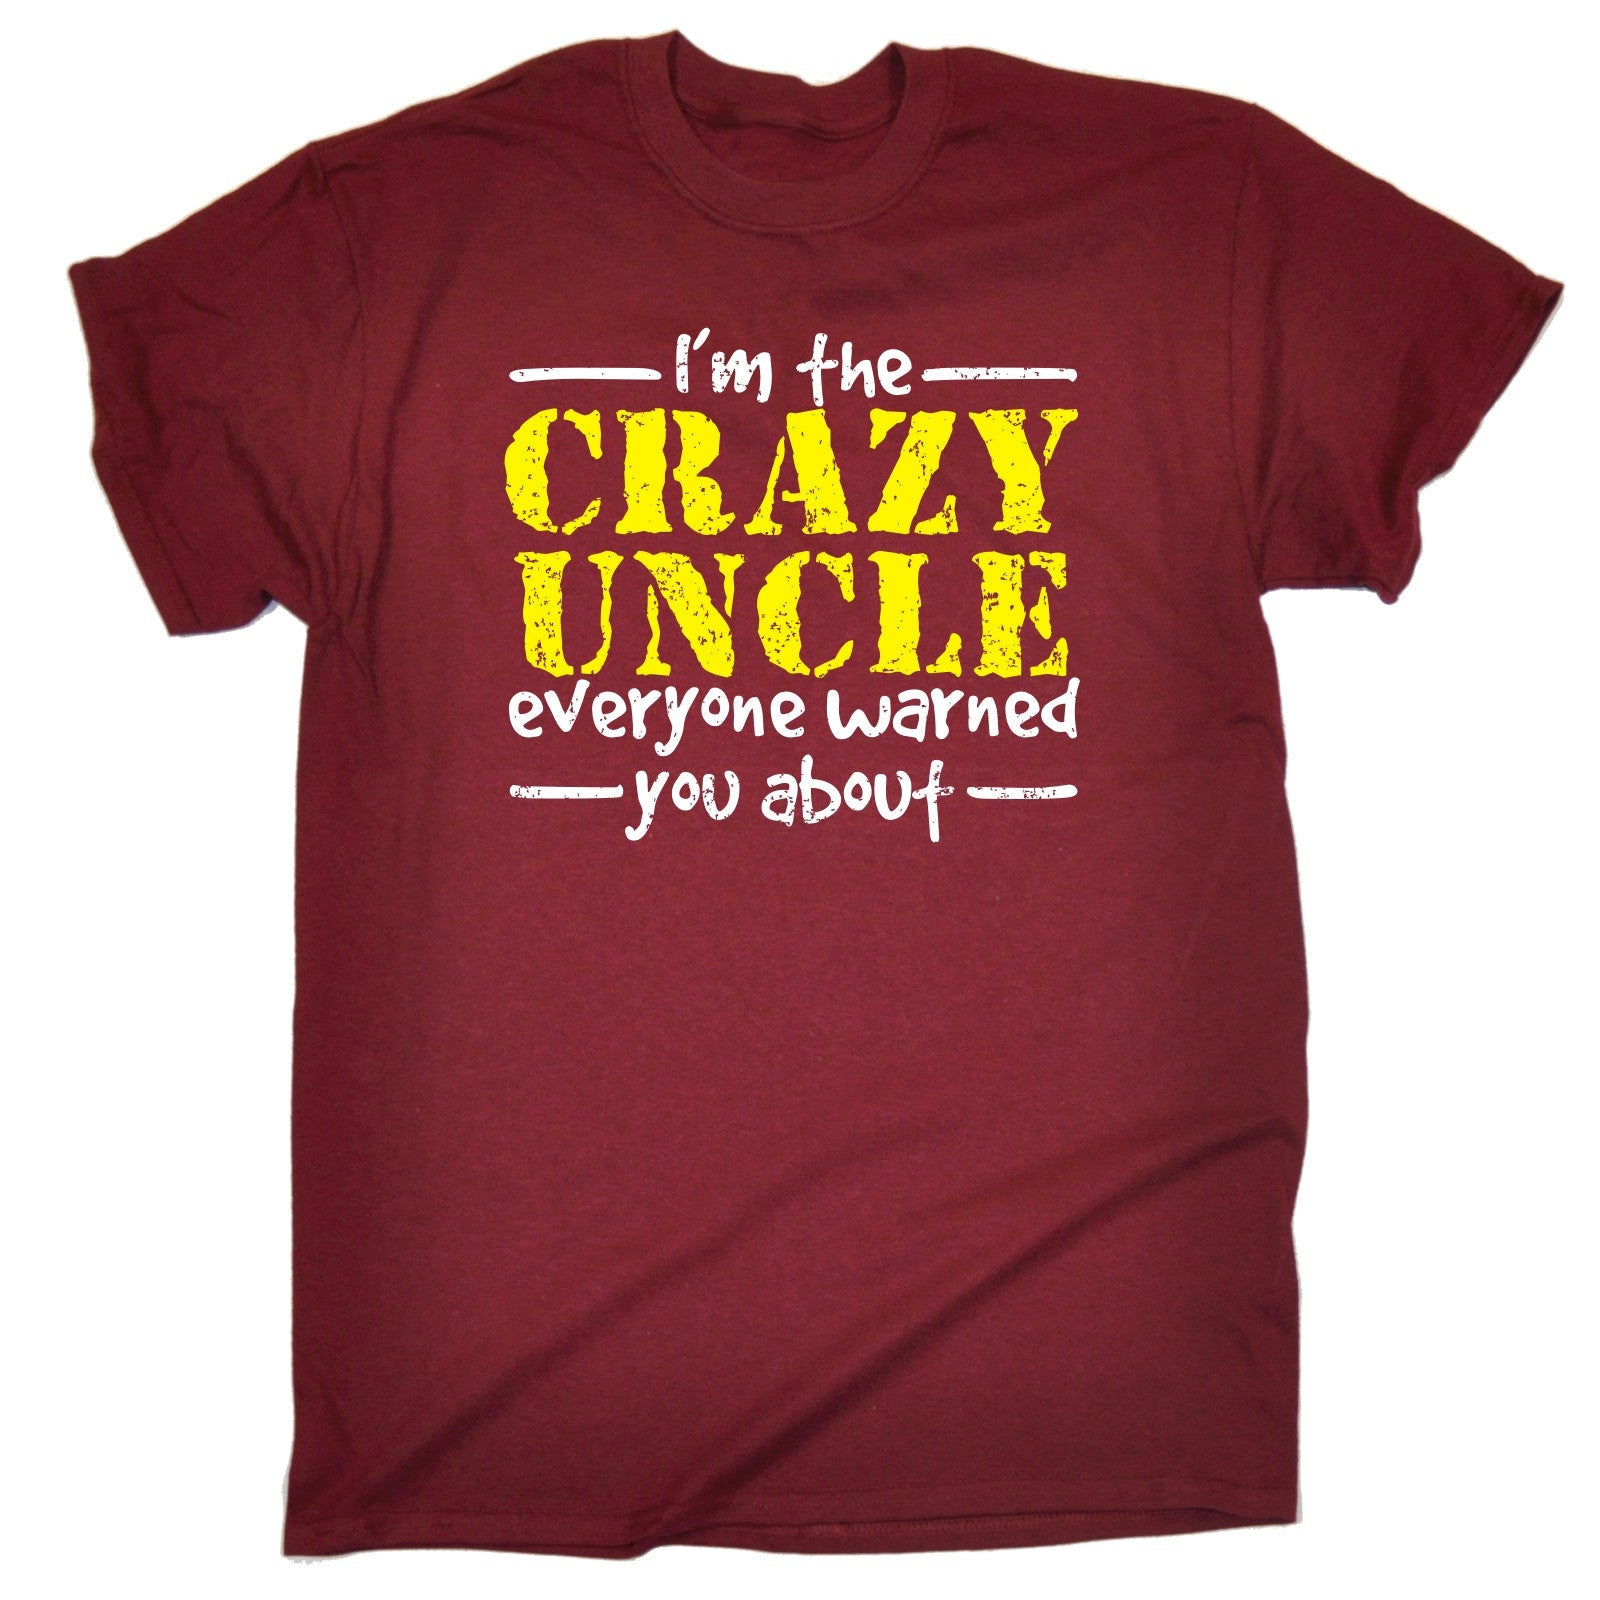 Im The Crazy Uncle à Warned You About MENS T-SHIRT tee birthday gift ...